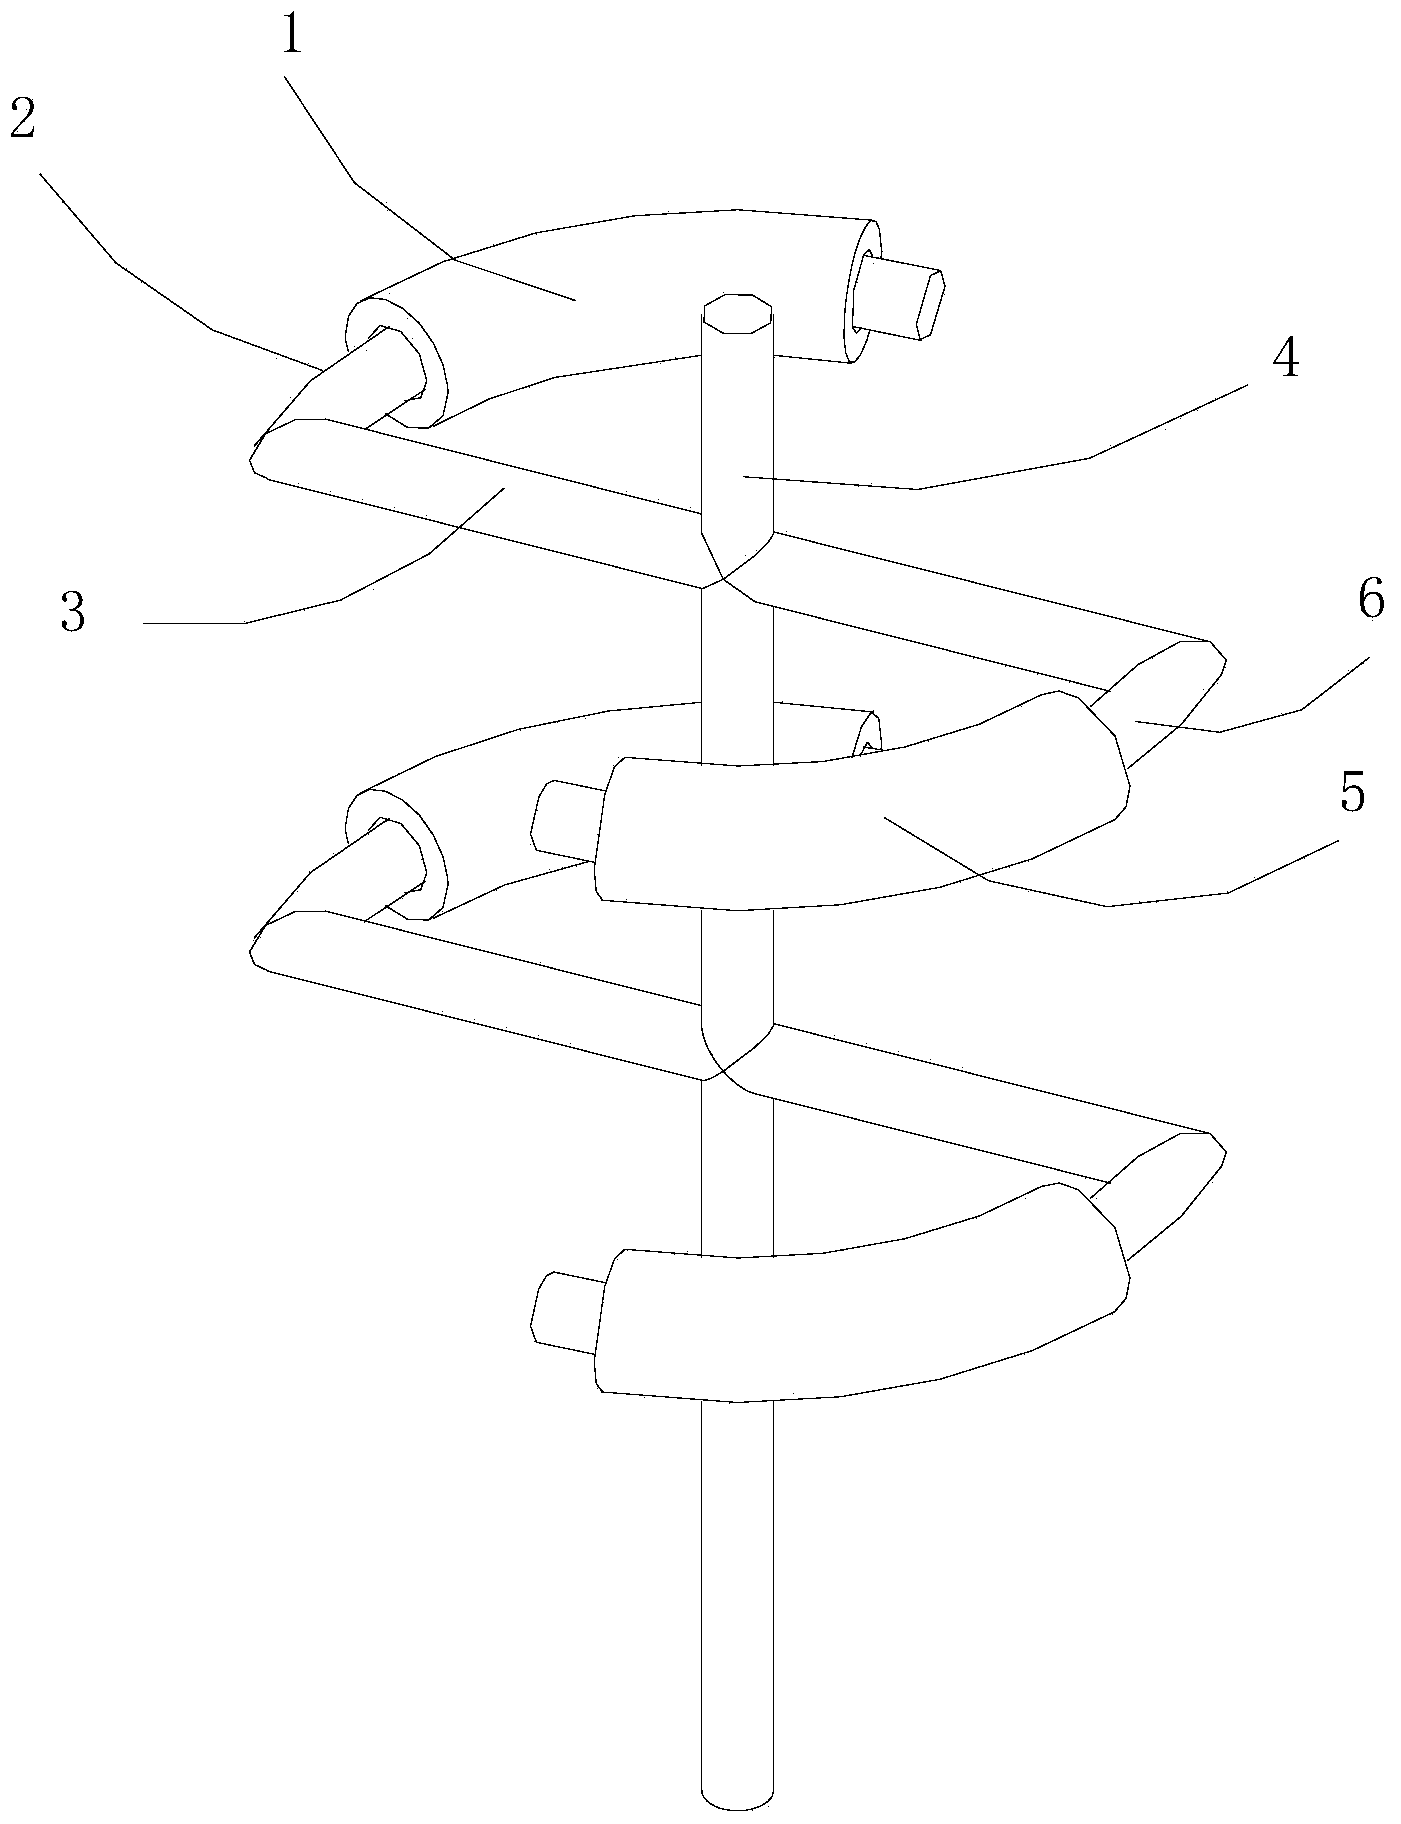 Power generation mechanism and hollow coil winding method